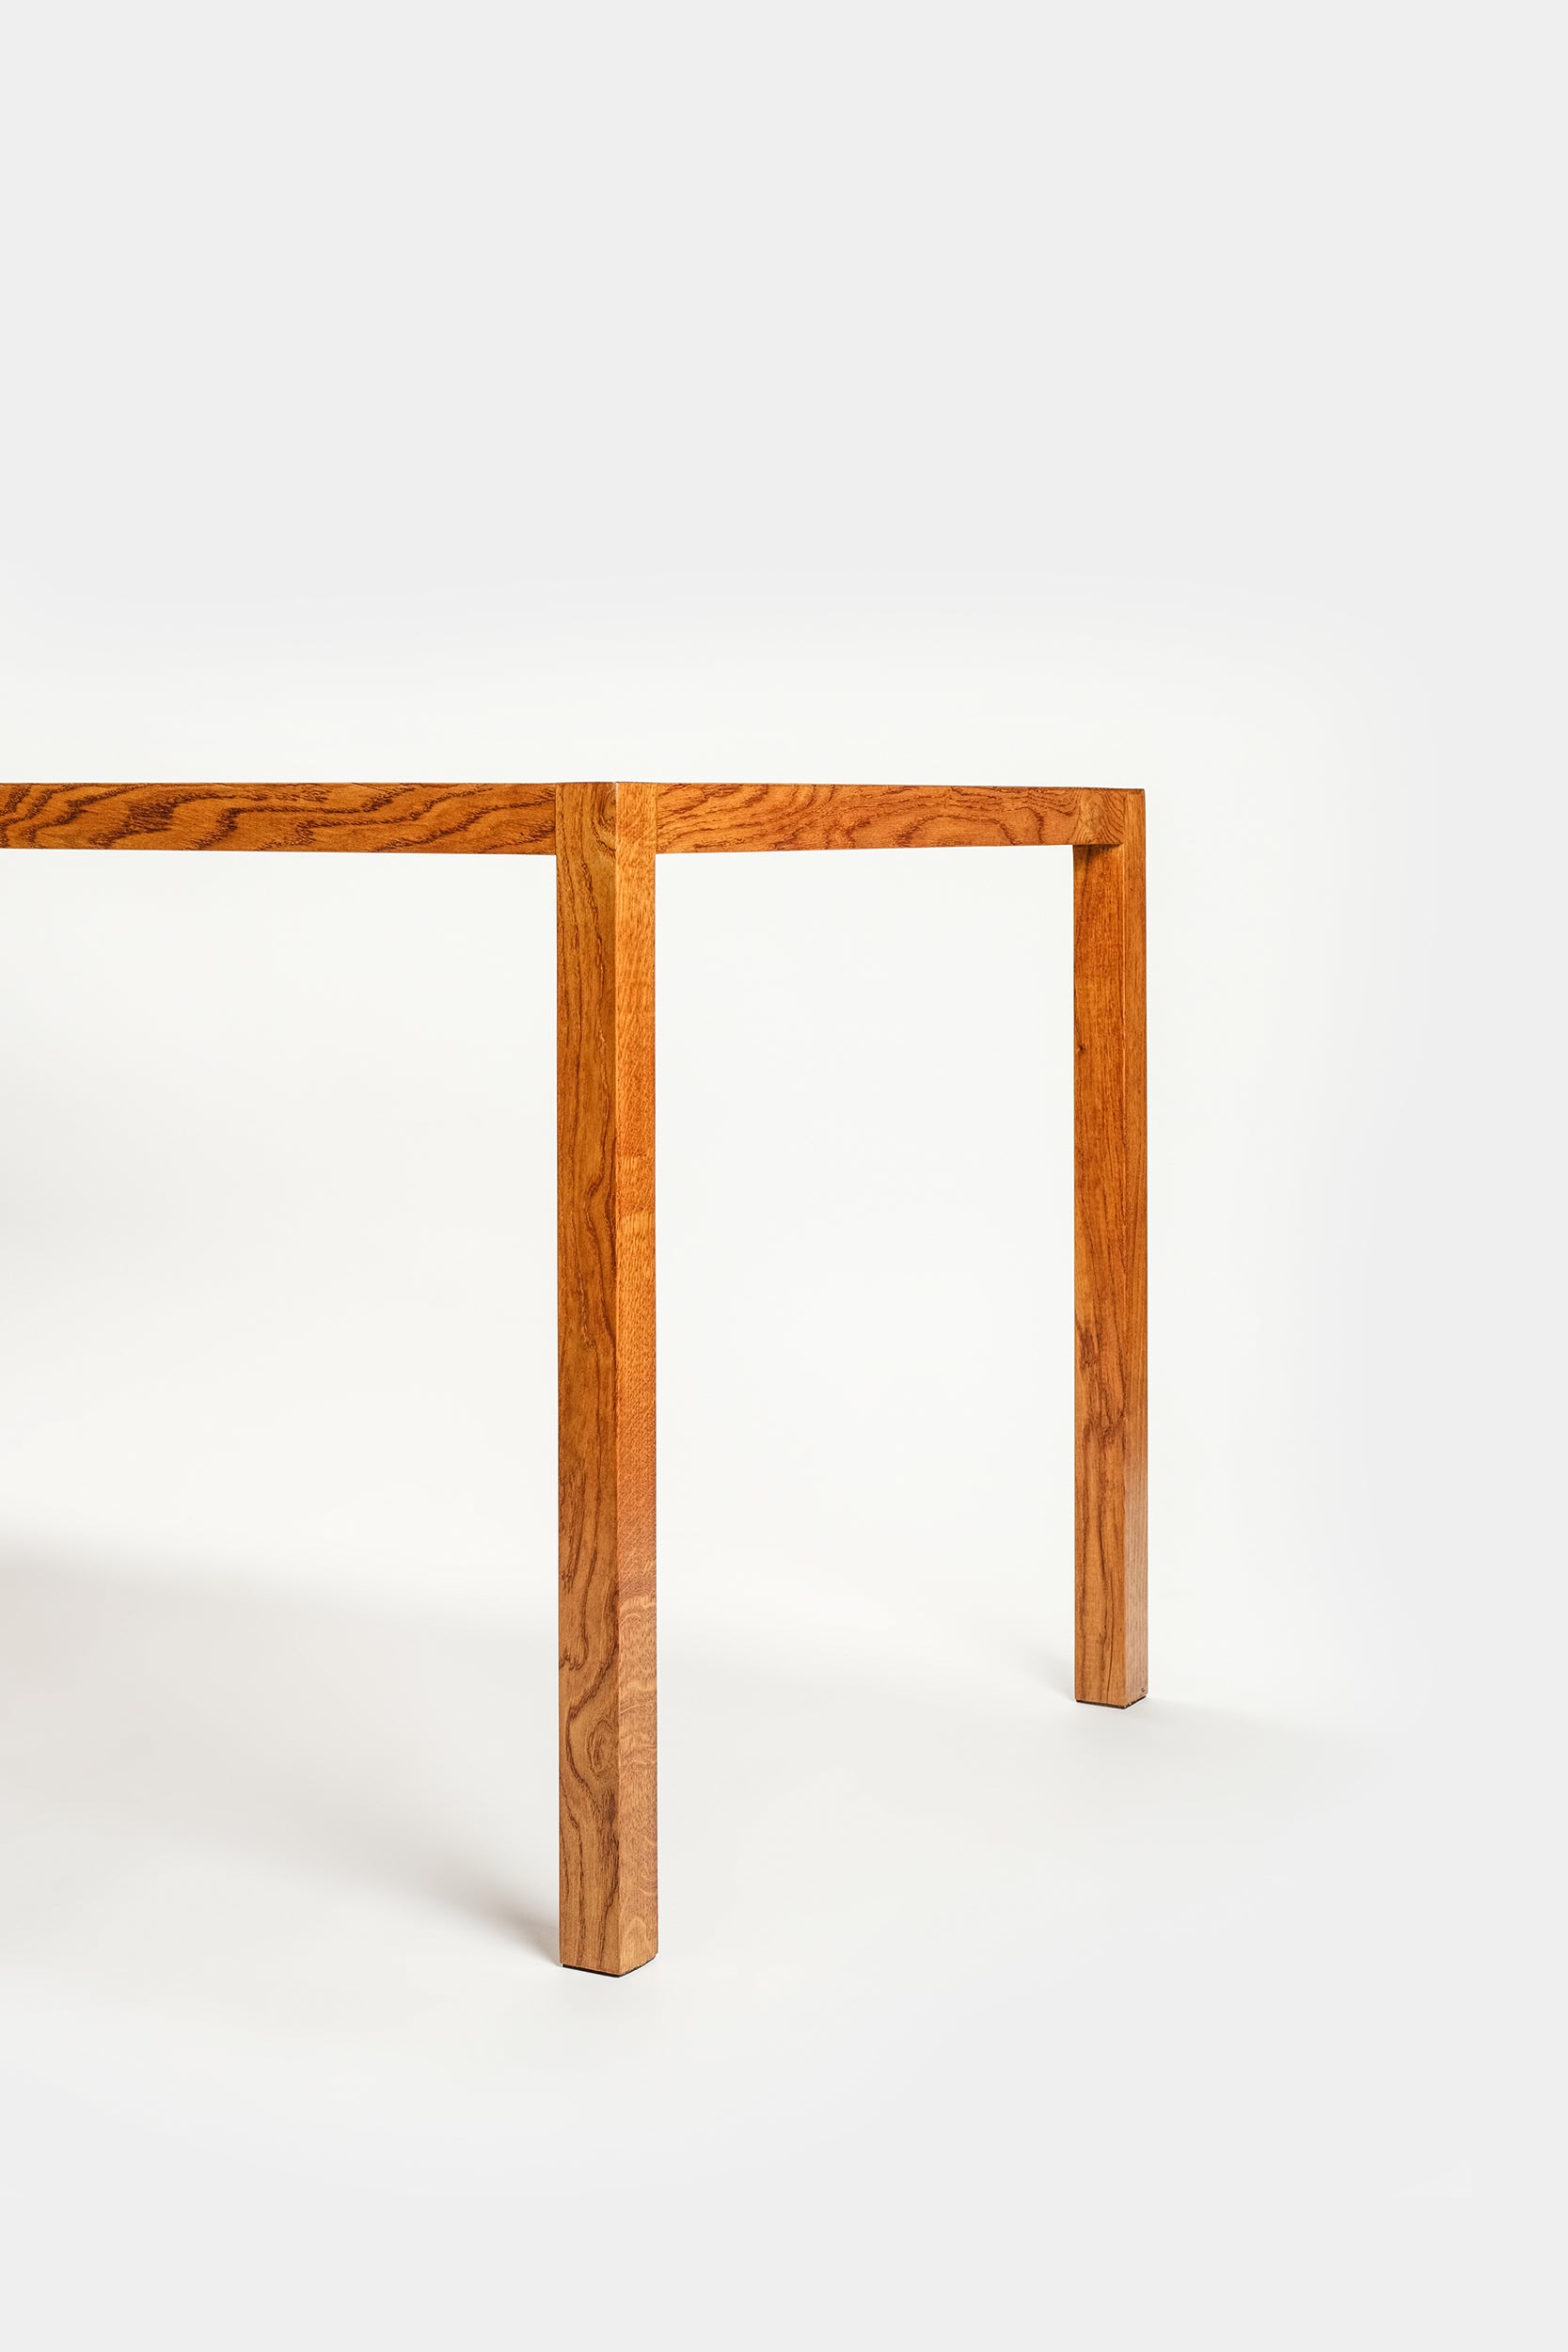 Hermann Bauer Oak table, Dining table 60s